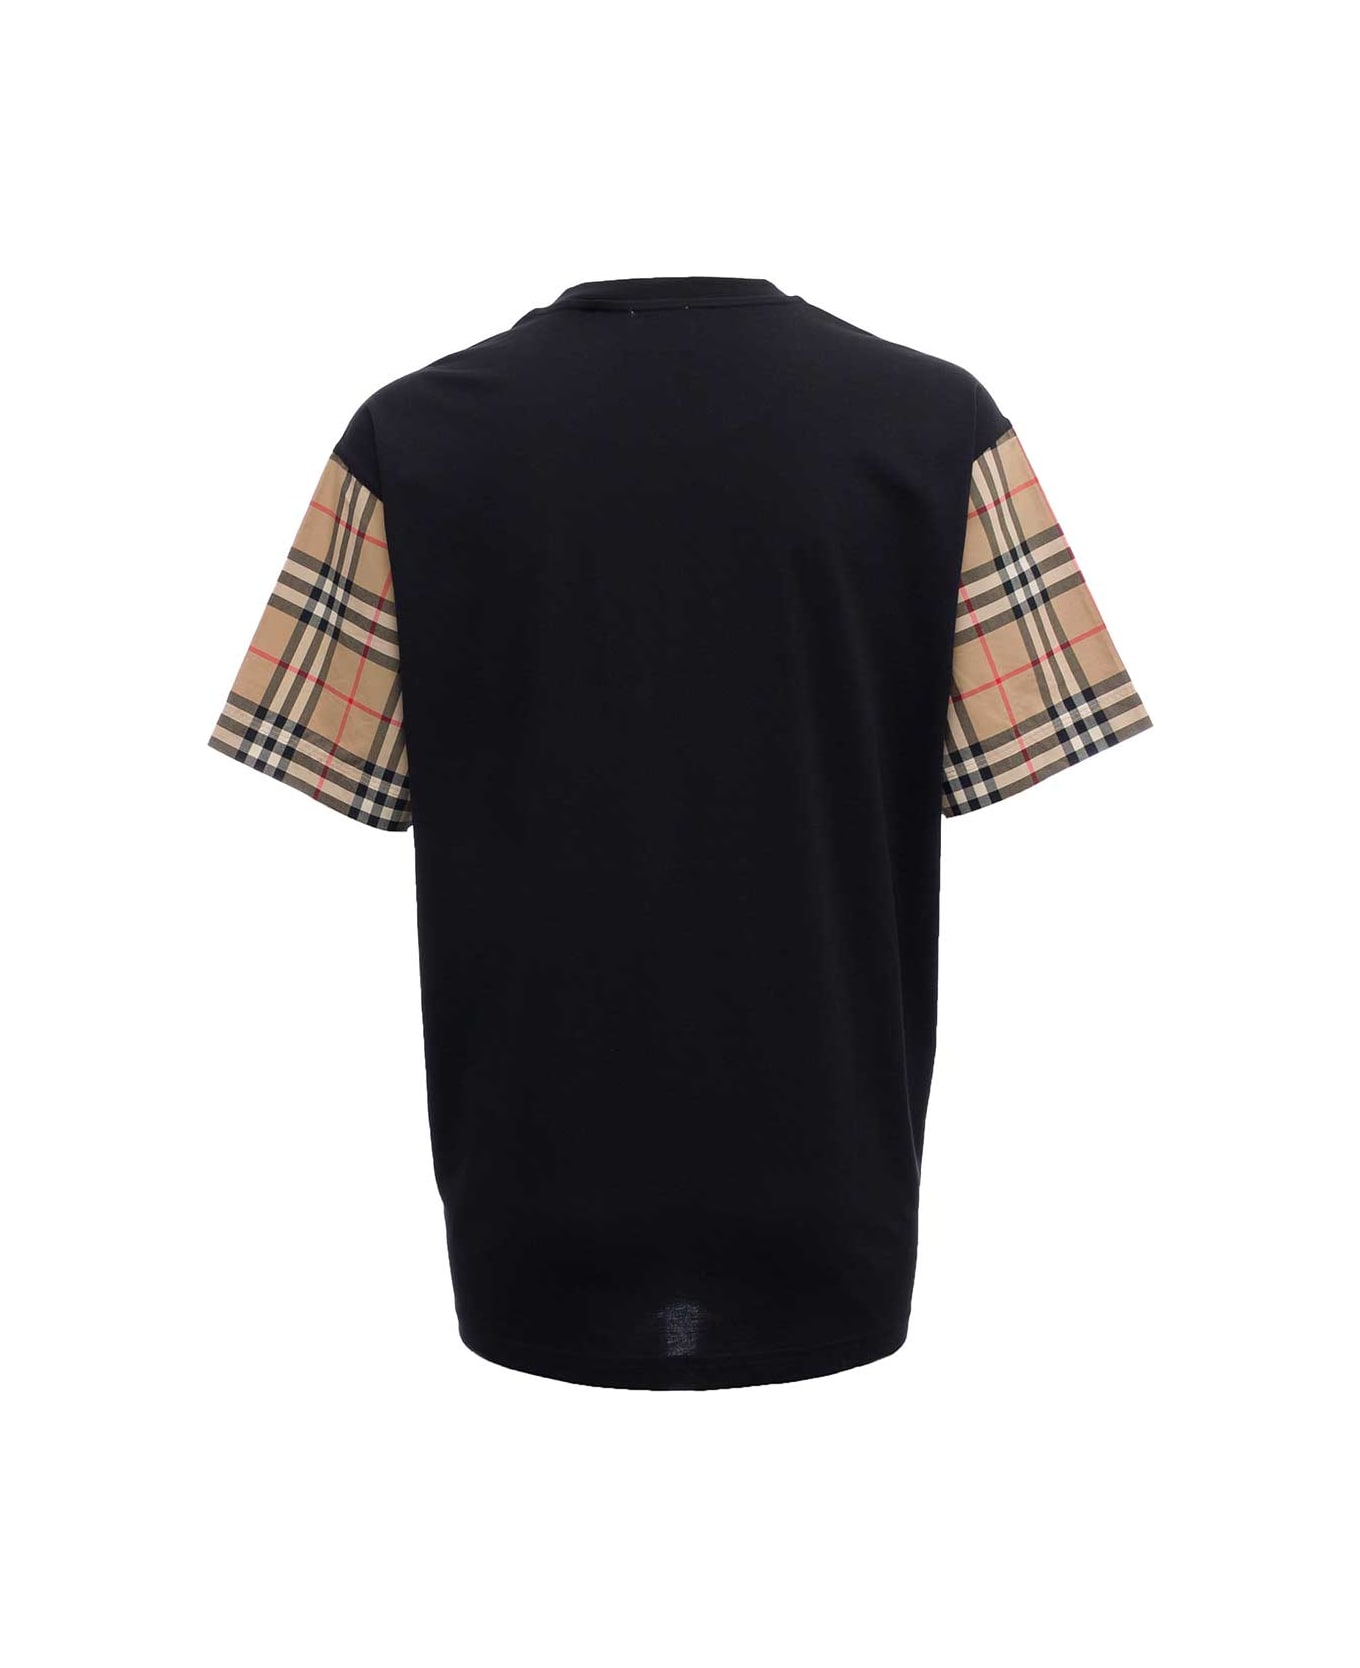 Burberry Black Cotton T-shirt With Vintage Check Sleeves - Black